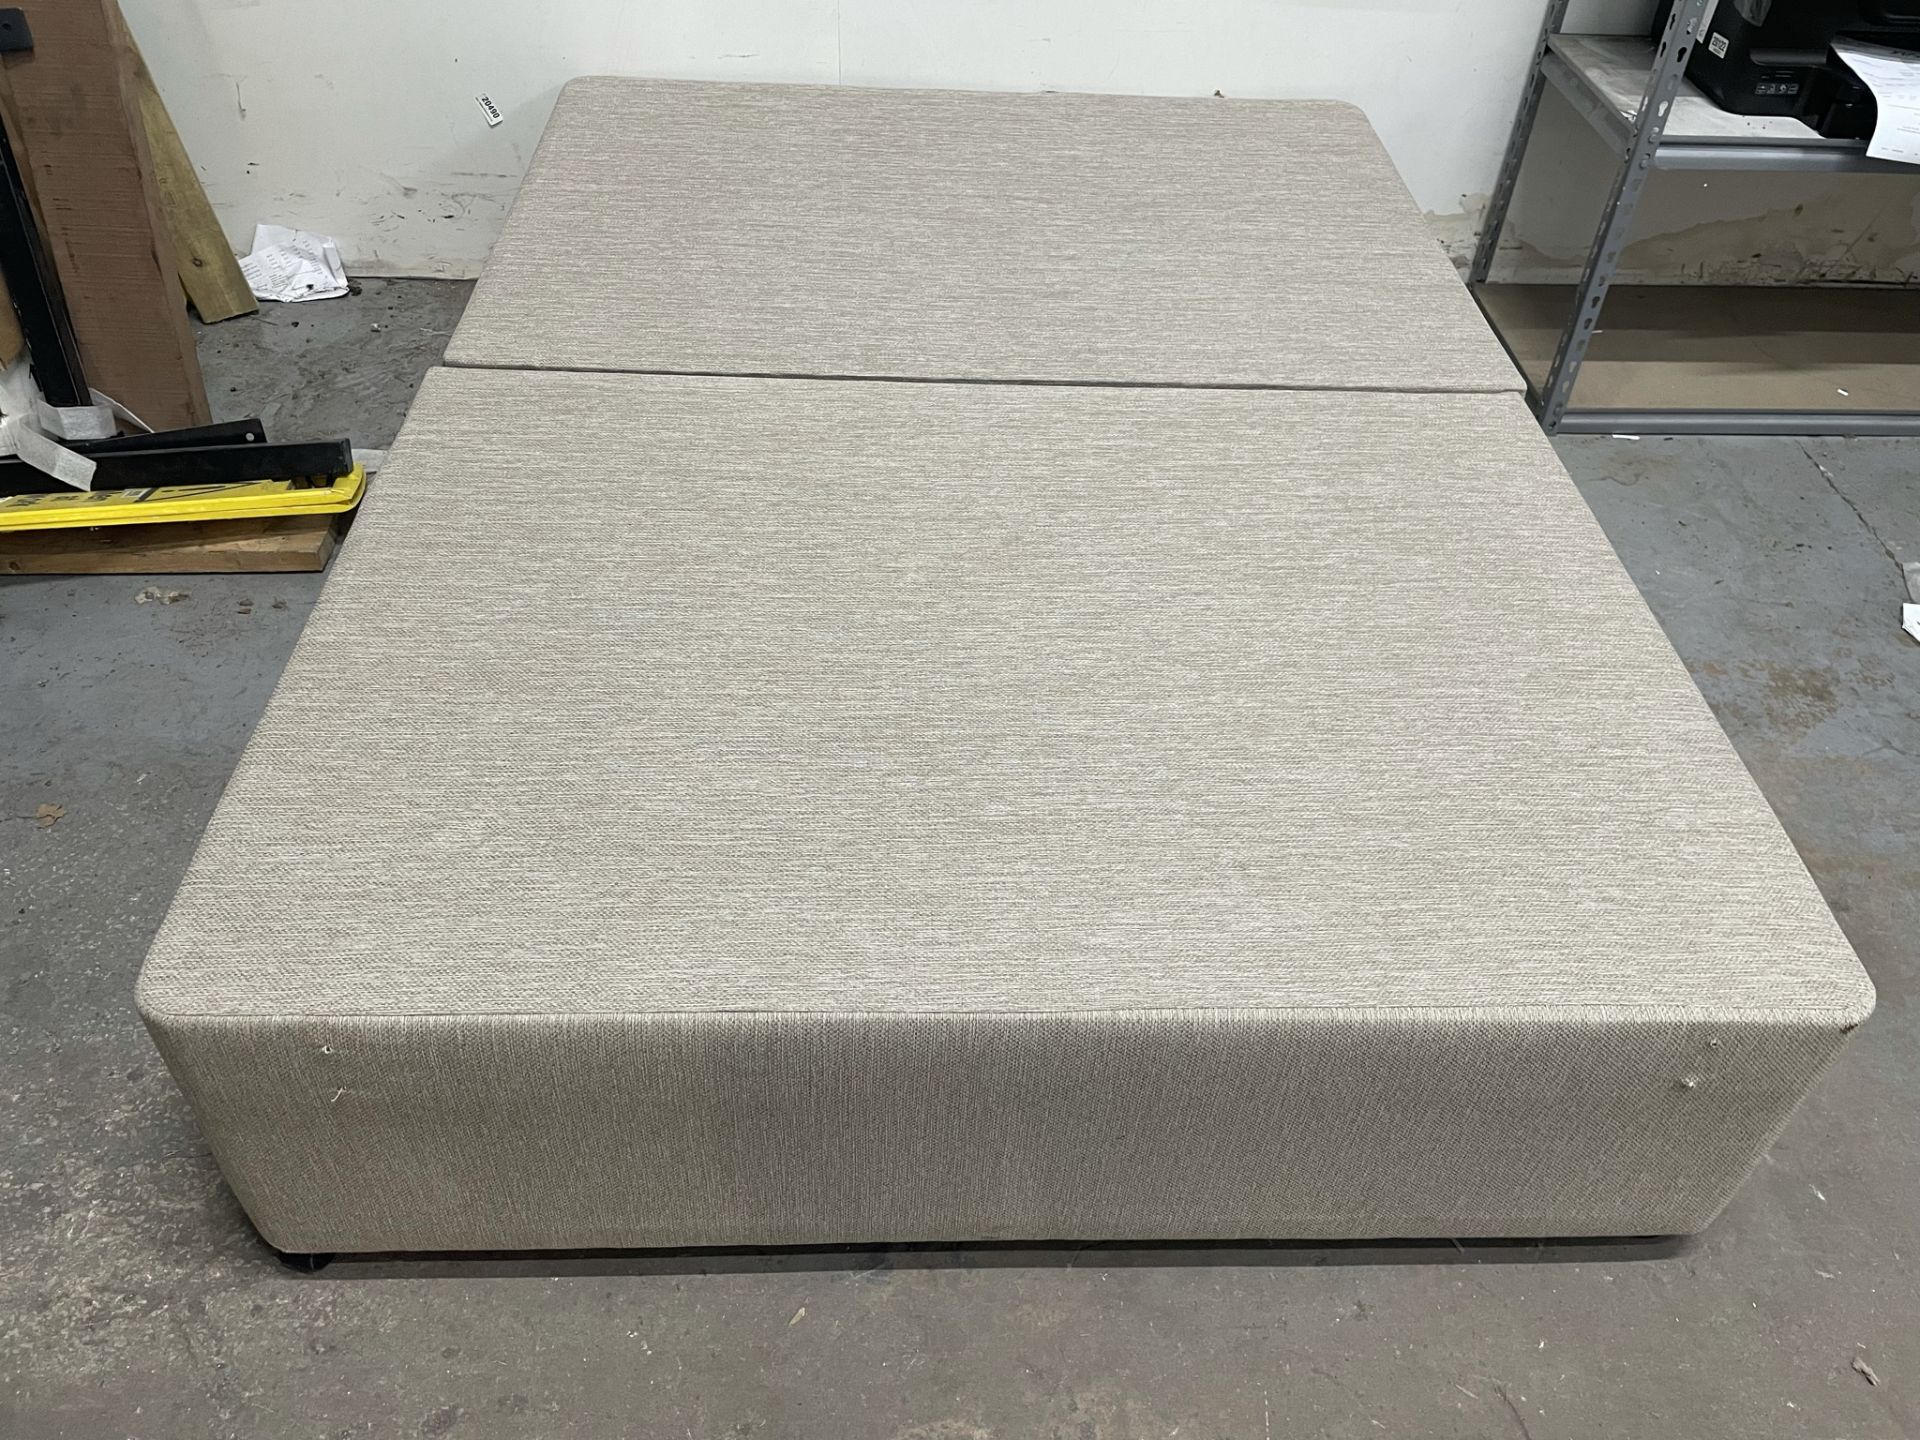 Ex Display Upholstered Double Divan Bed w/ 2 x Drawers in Cream Fabric - Image 2 of 3